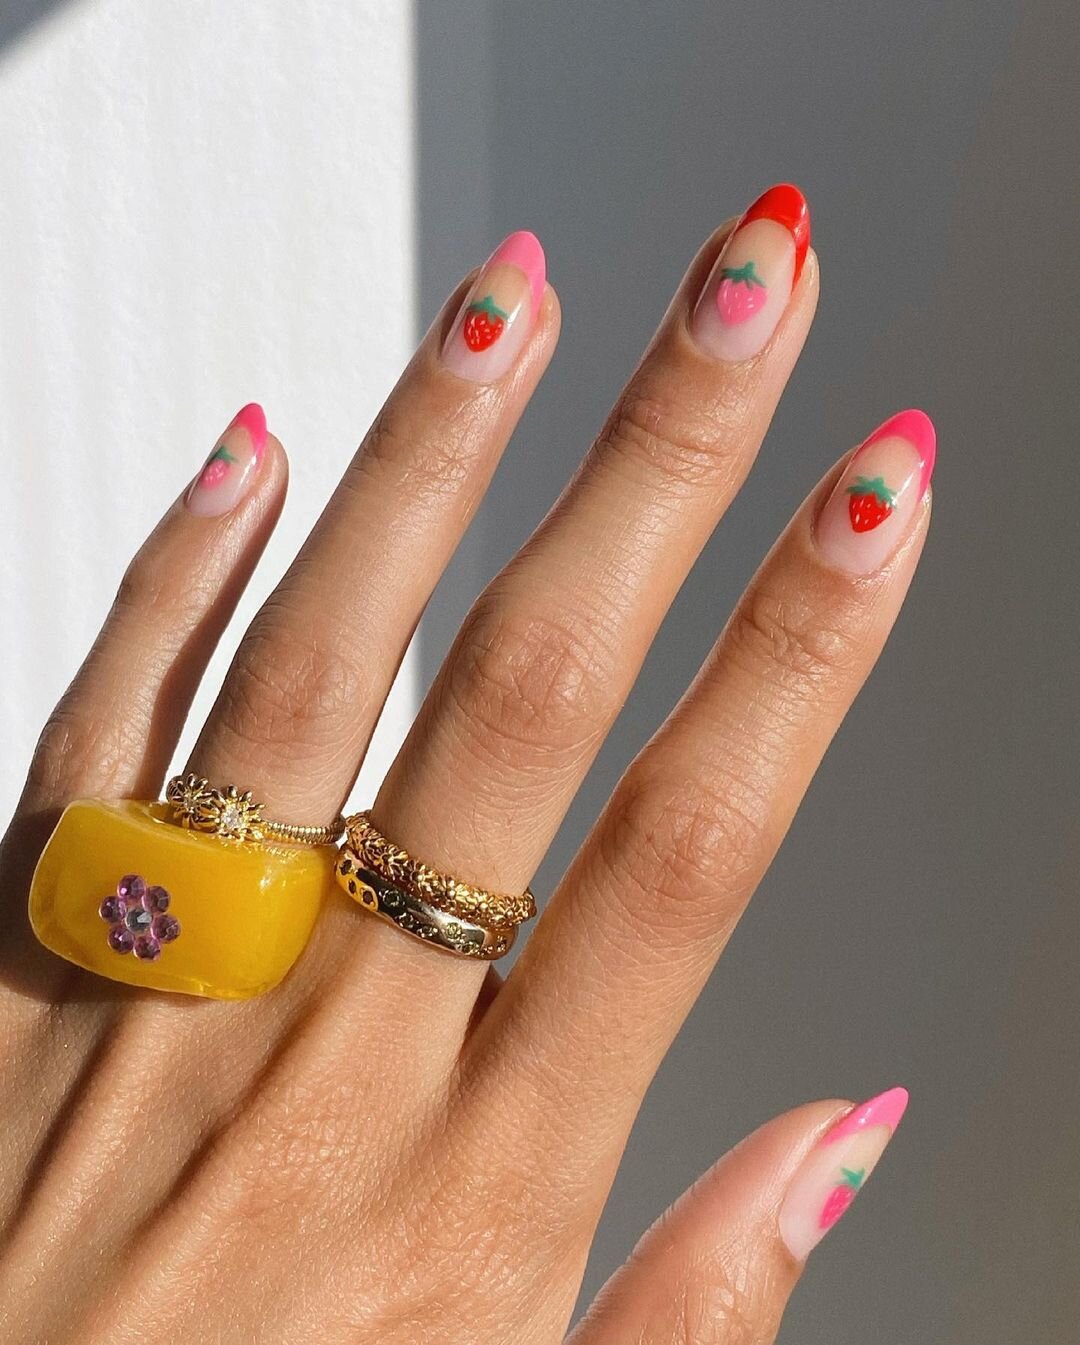 11. 15 Nail Designs Inspired by Your Favorite Summer Fruits